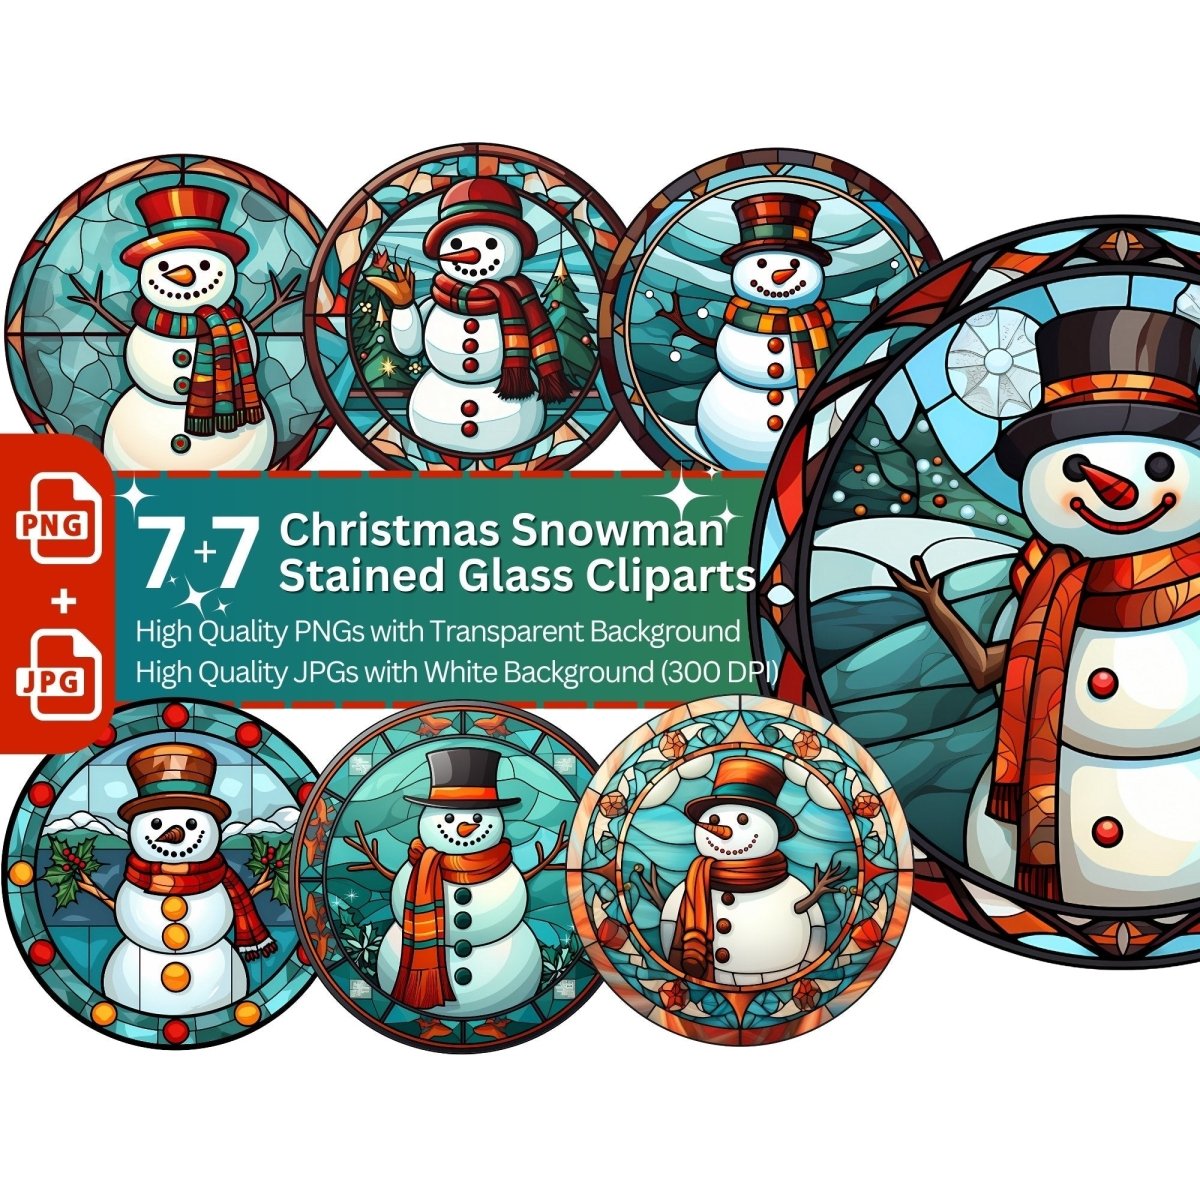 Snowman Stained Glass 7+7 PNG Clip Art Bundle Christmas Decoration - Everything Pixel